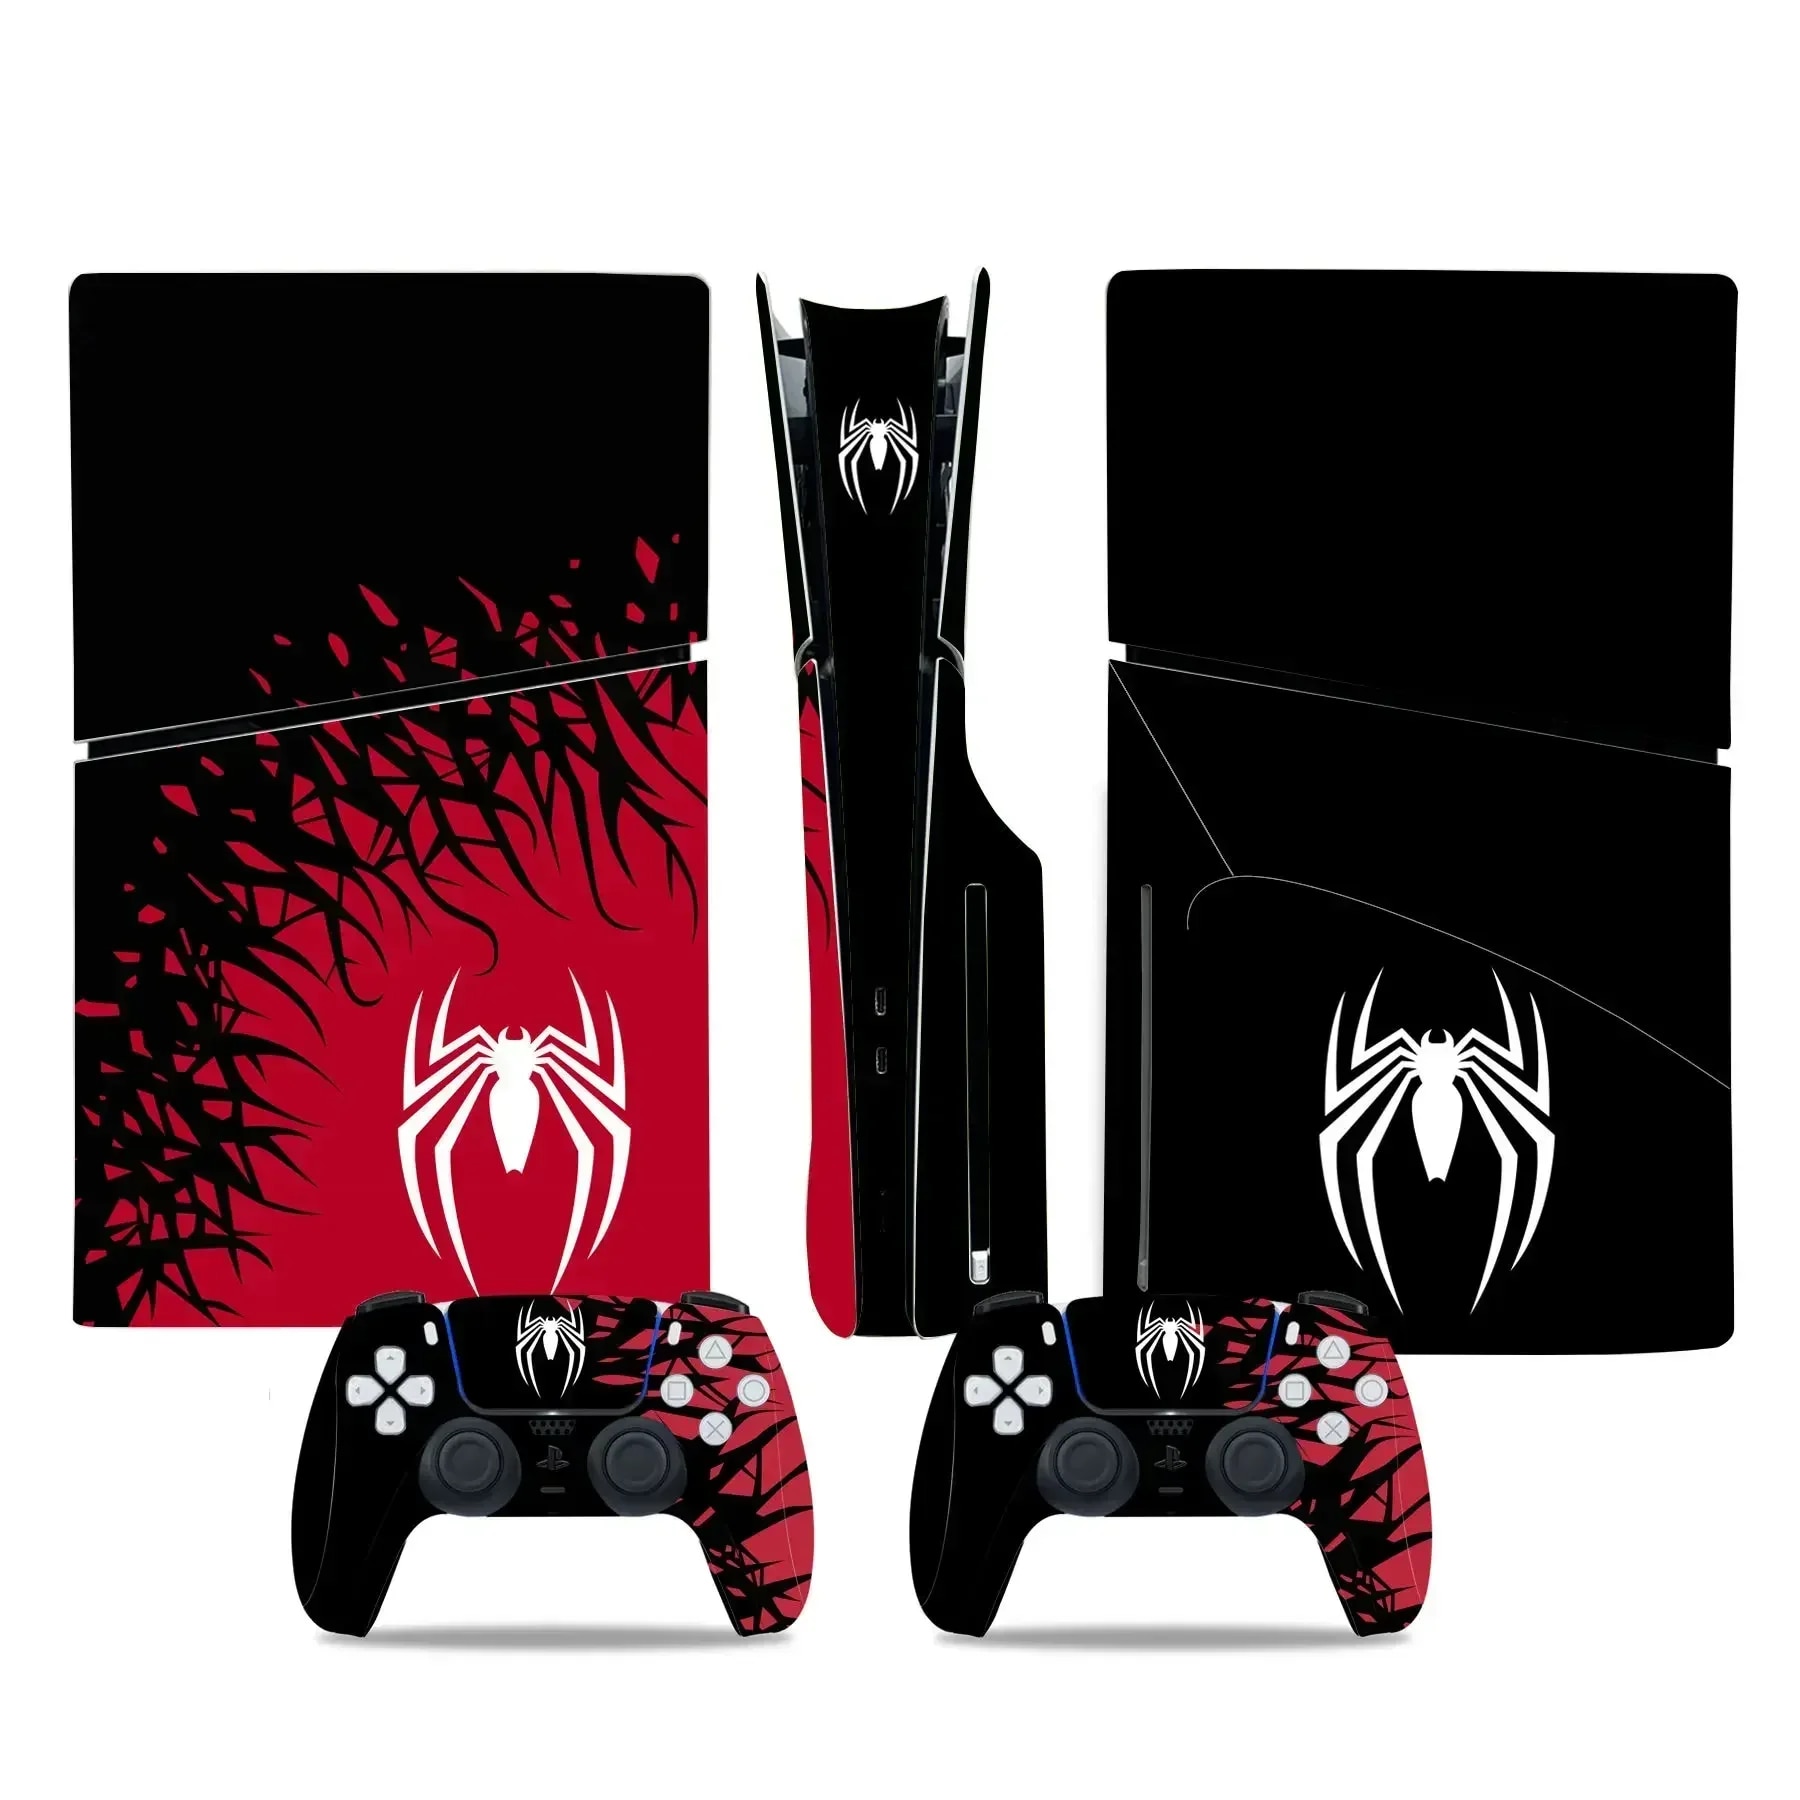 【Top-rated】 Spiderman Skin Sticker For Ps5 Disk/digital Version Skin Sticker Console And 2 Controllers Ps5 Disk/digital Version